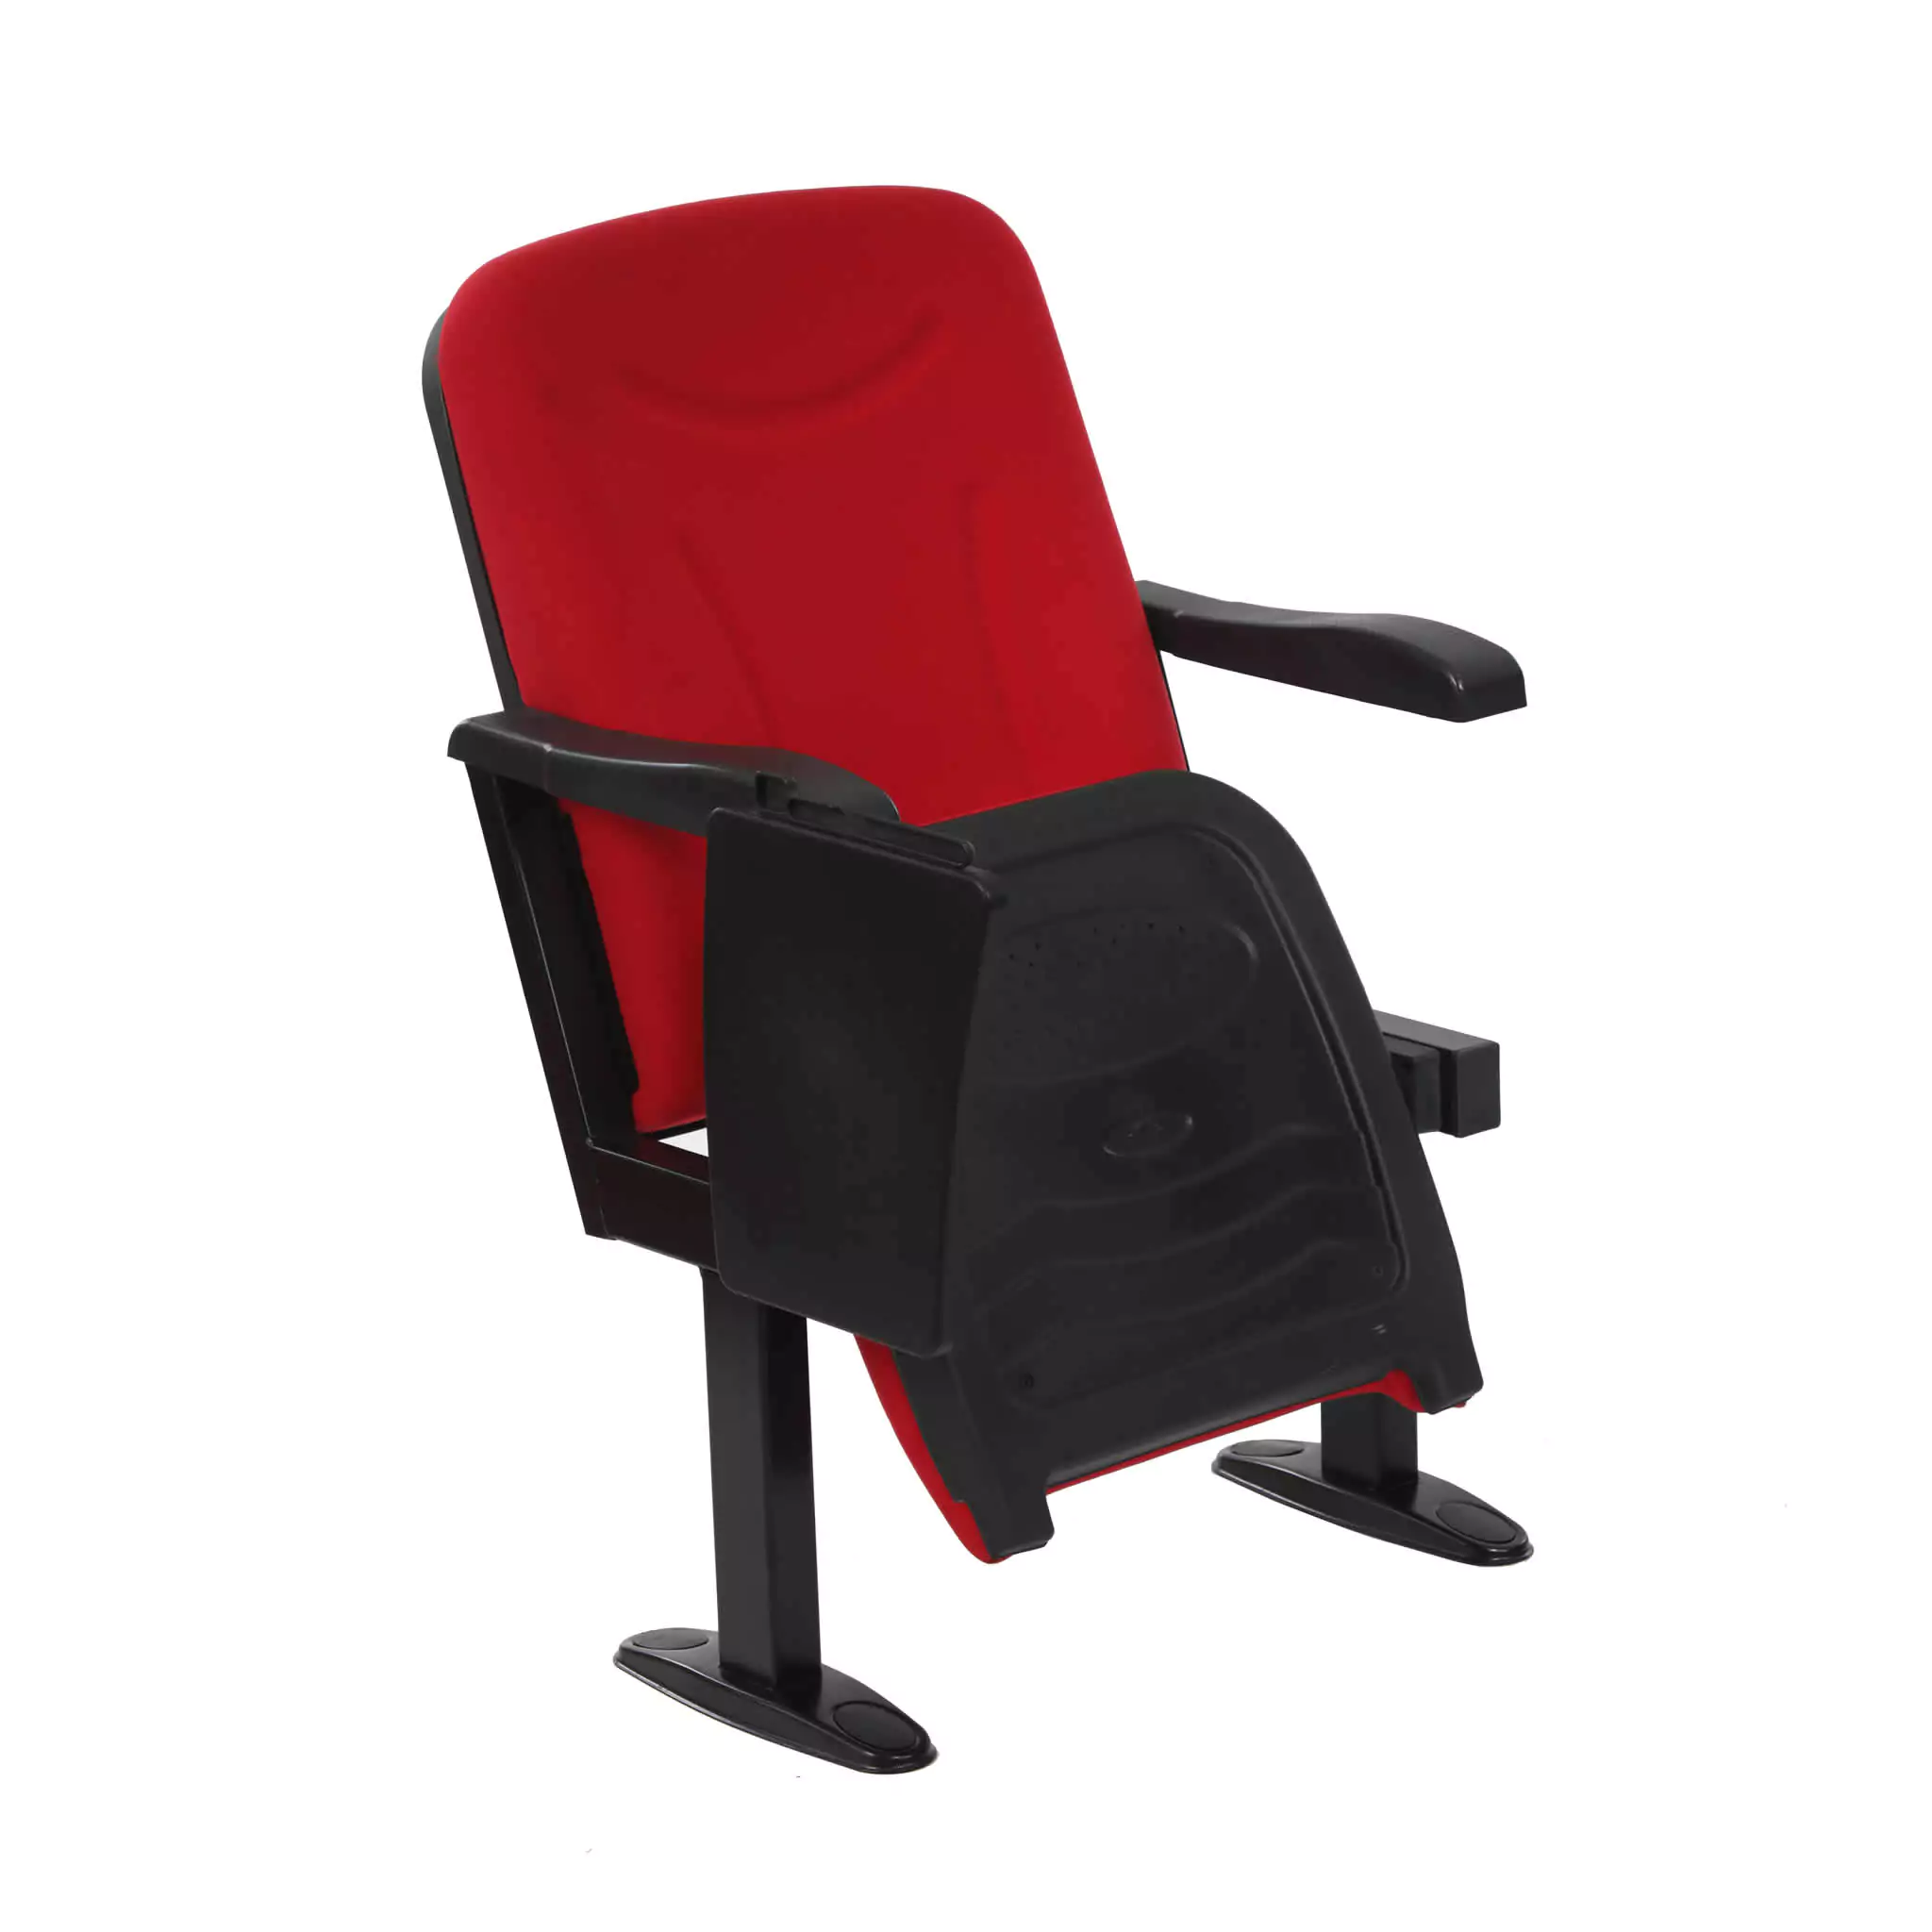 Simko Seating Product Conference Seat Zirkon S 04